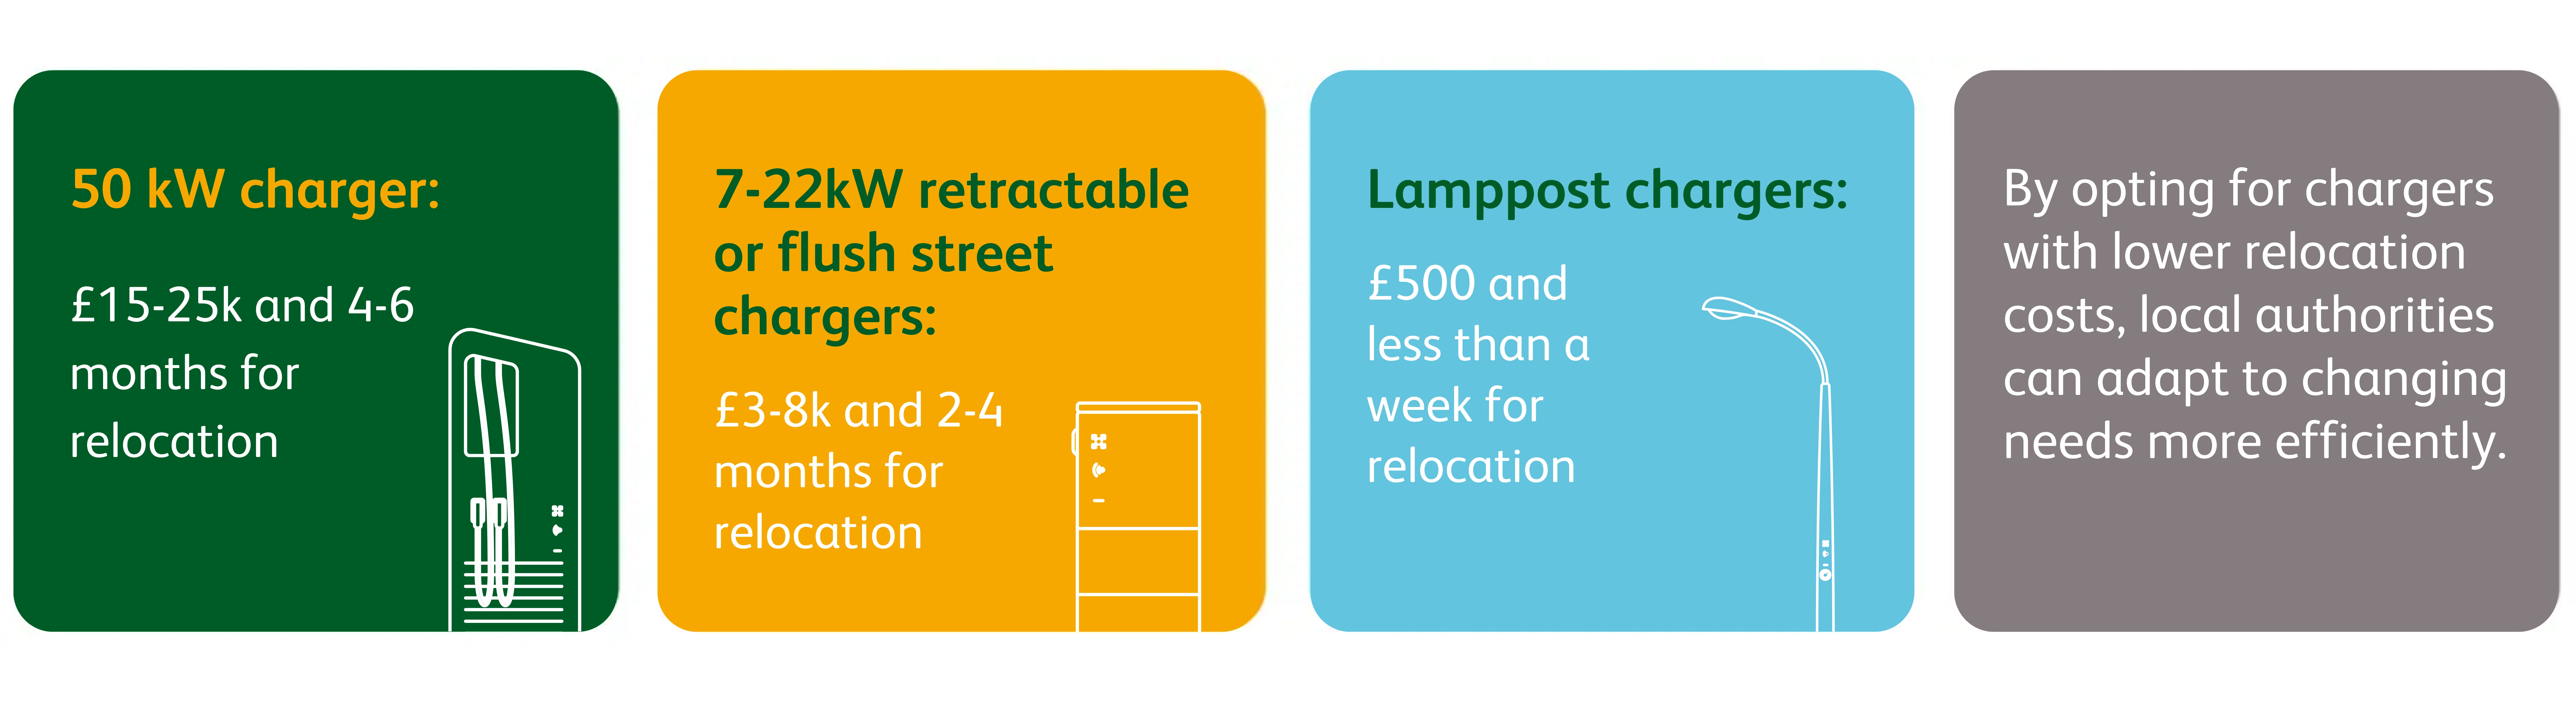 Relocation costs: 1) for a 50kW charger, it costs £15-25k and 4-6 months for relocation, 2) for a 7-22kW retractable or street flush charger, it costs £3-8k and 2-4 months for relocation, 3) for a lamppost charger, it costs £500 and less than 3 hours for relocation. By opting for chargers with lower relocation costs, local authorities can adapt to changing needs more efficiently.